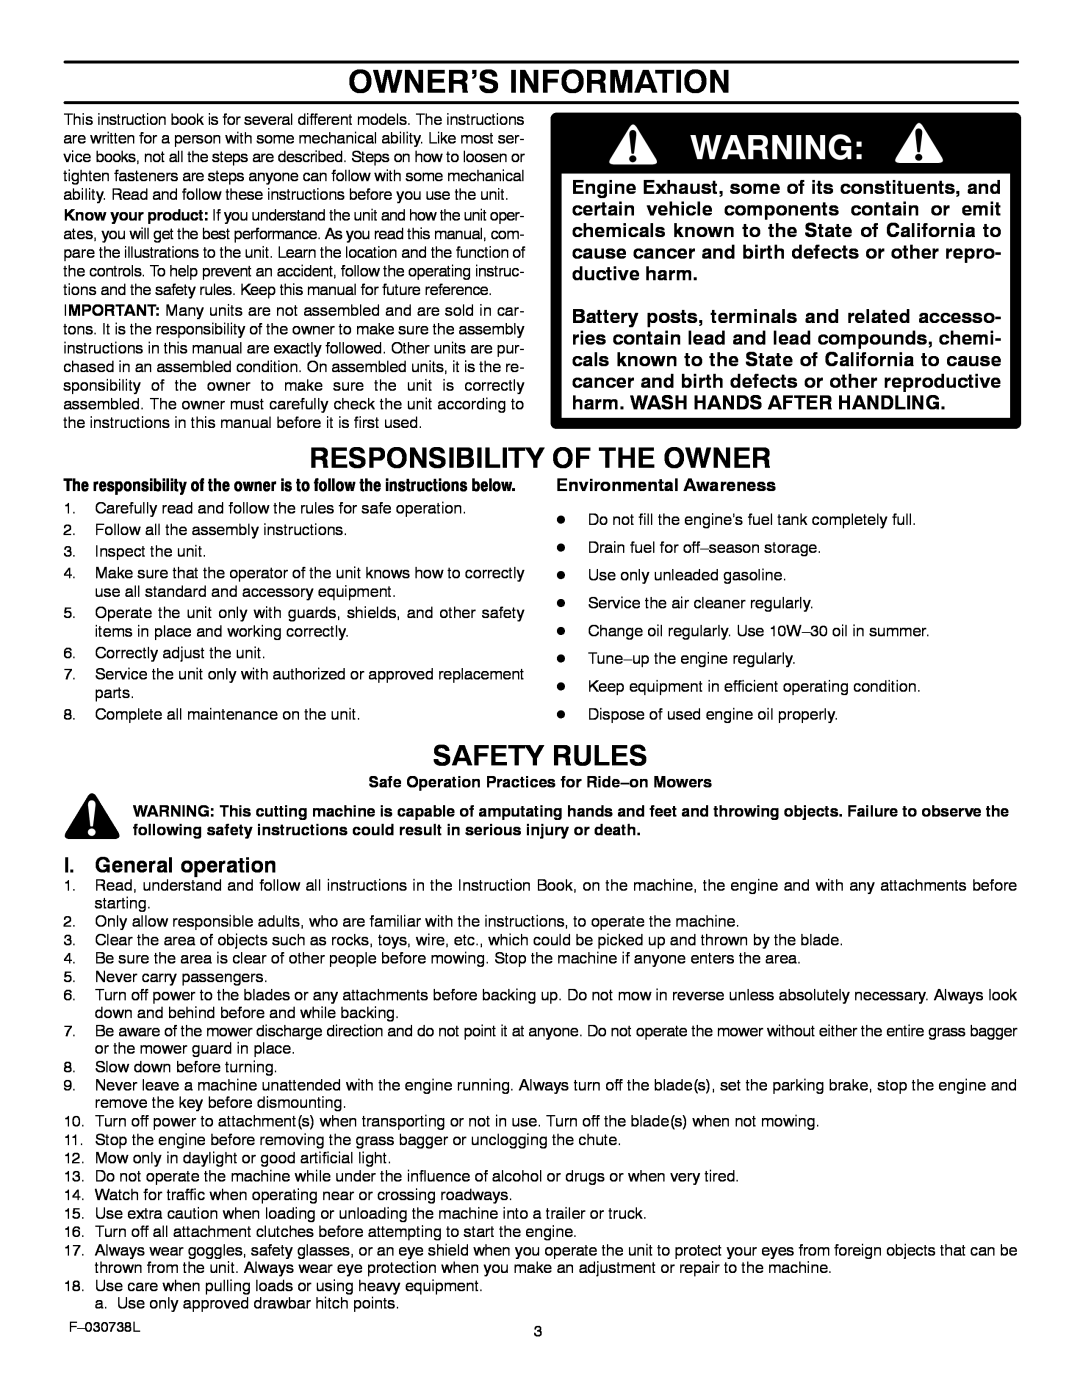 Murray 425603x99A manual Owner’S Information, Responsibility Of The Owner, Safety Rules, I. General operation 